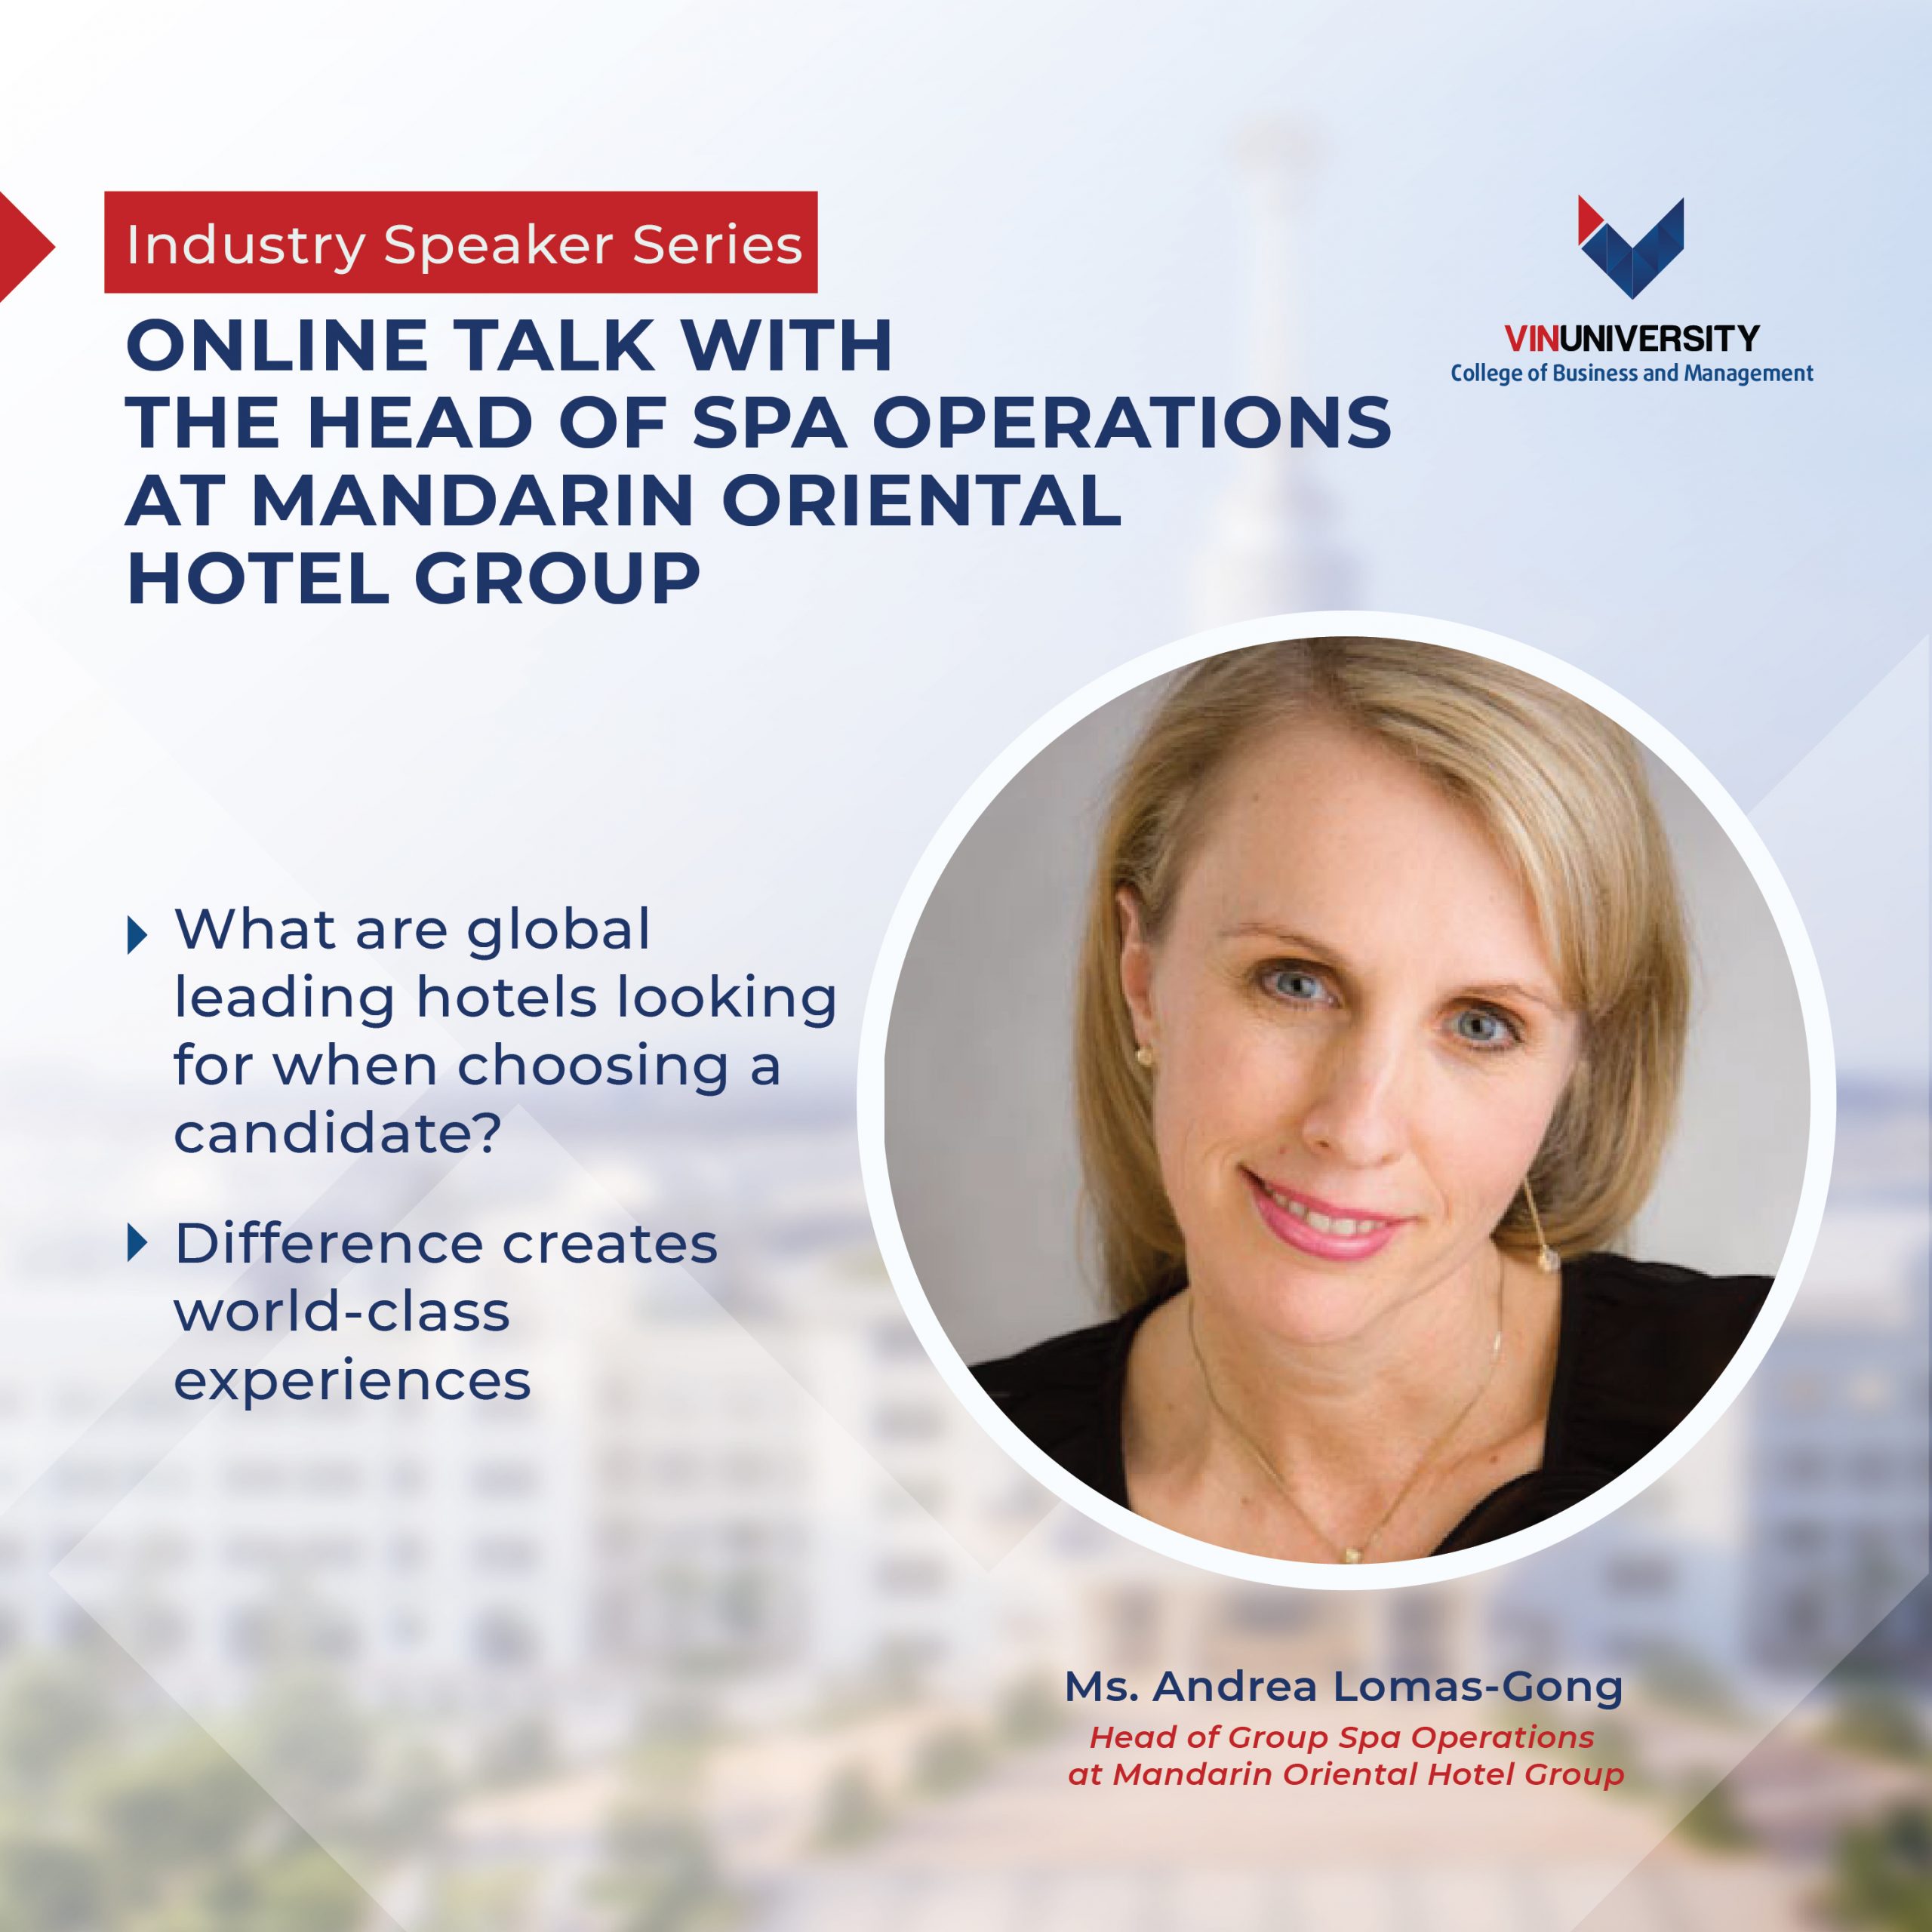 Industry Speaker Series] Online Talk With The Head Of Group Spa Operations  At Mandarin Oriental Hotel Group - VinUni